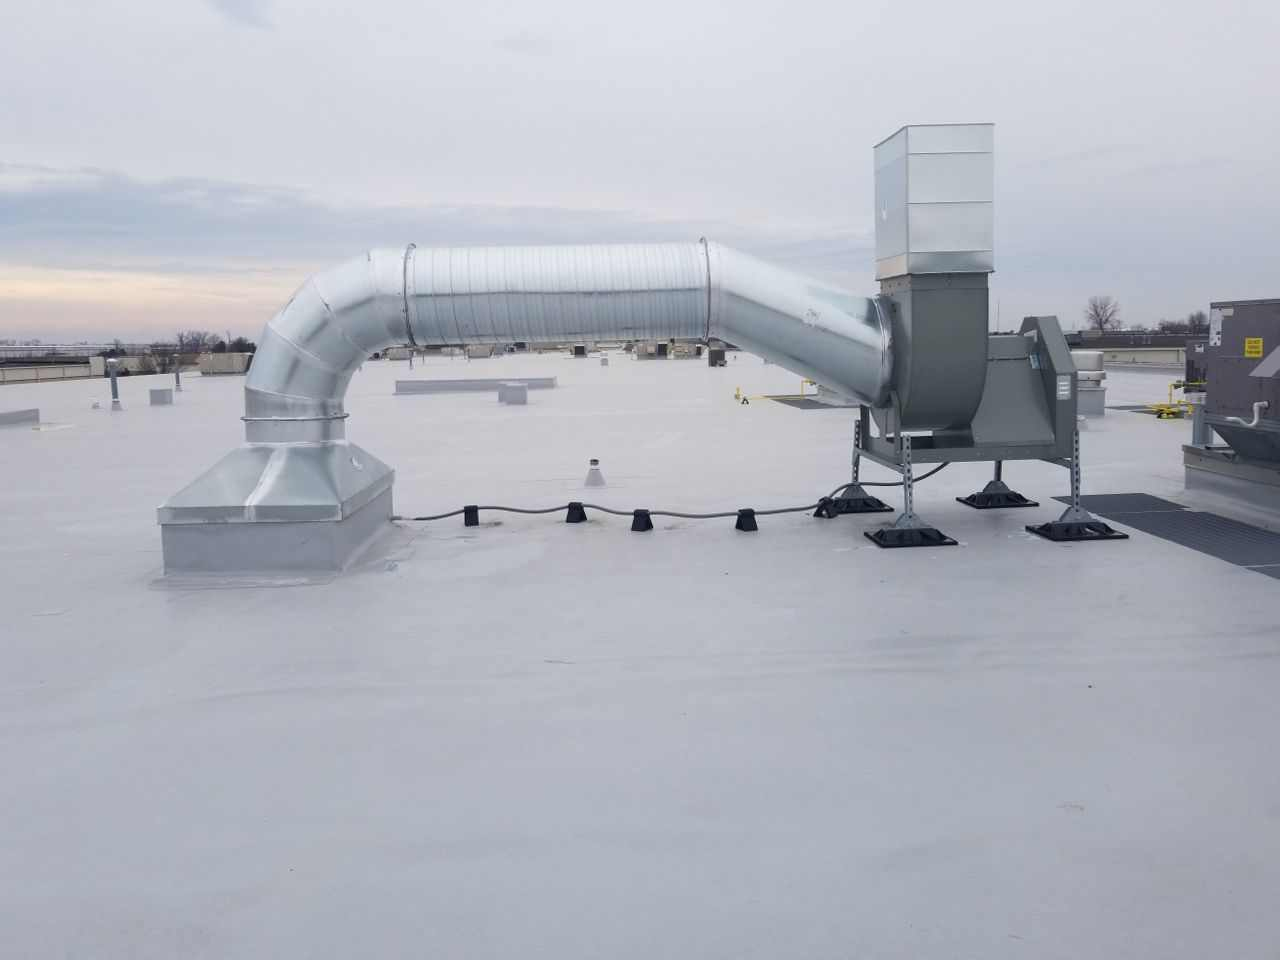 Tpo And Epdm Commercial Roof Systems: What'S Best For Your Building? à Epdm Tpo